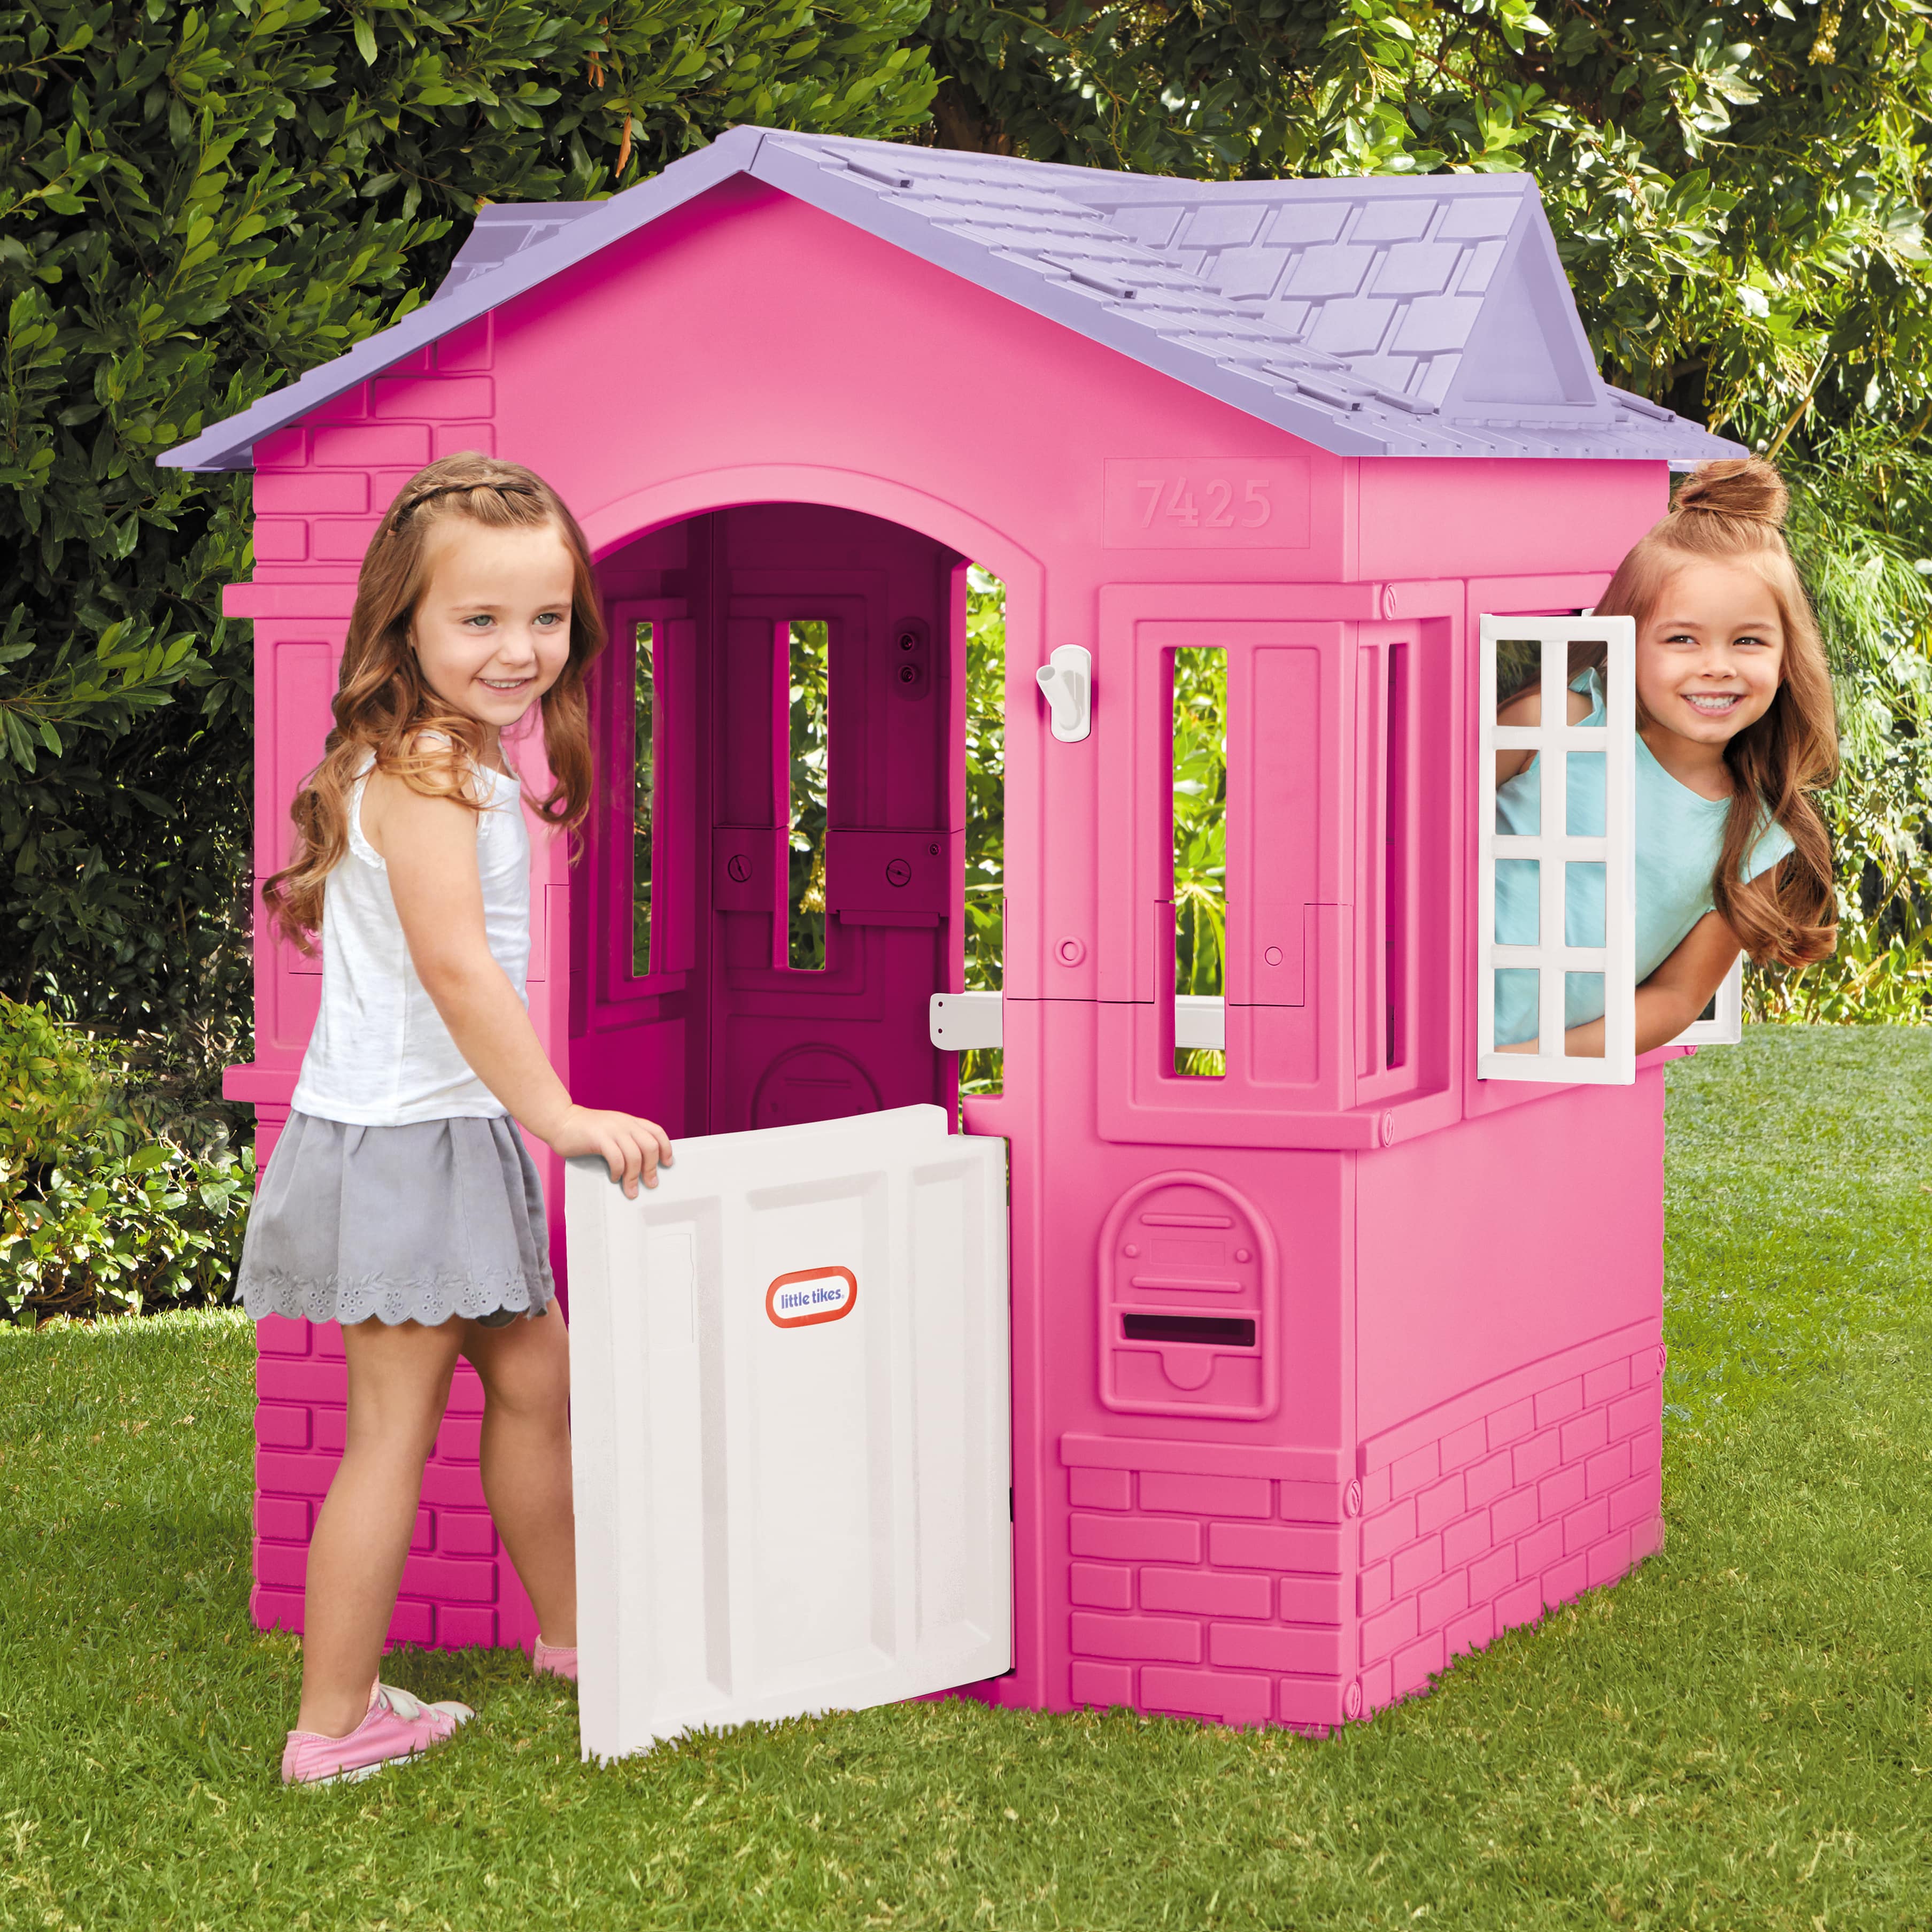 Little Tikes Cape Cottage House, Pink - Pretend Playhouse for Girls Boys Kids 2-8 Years Old - image 3 of 8